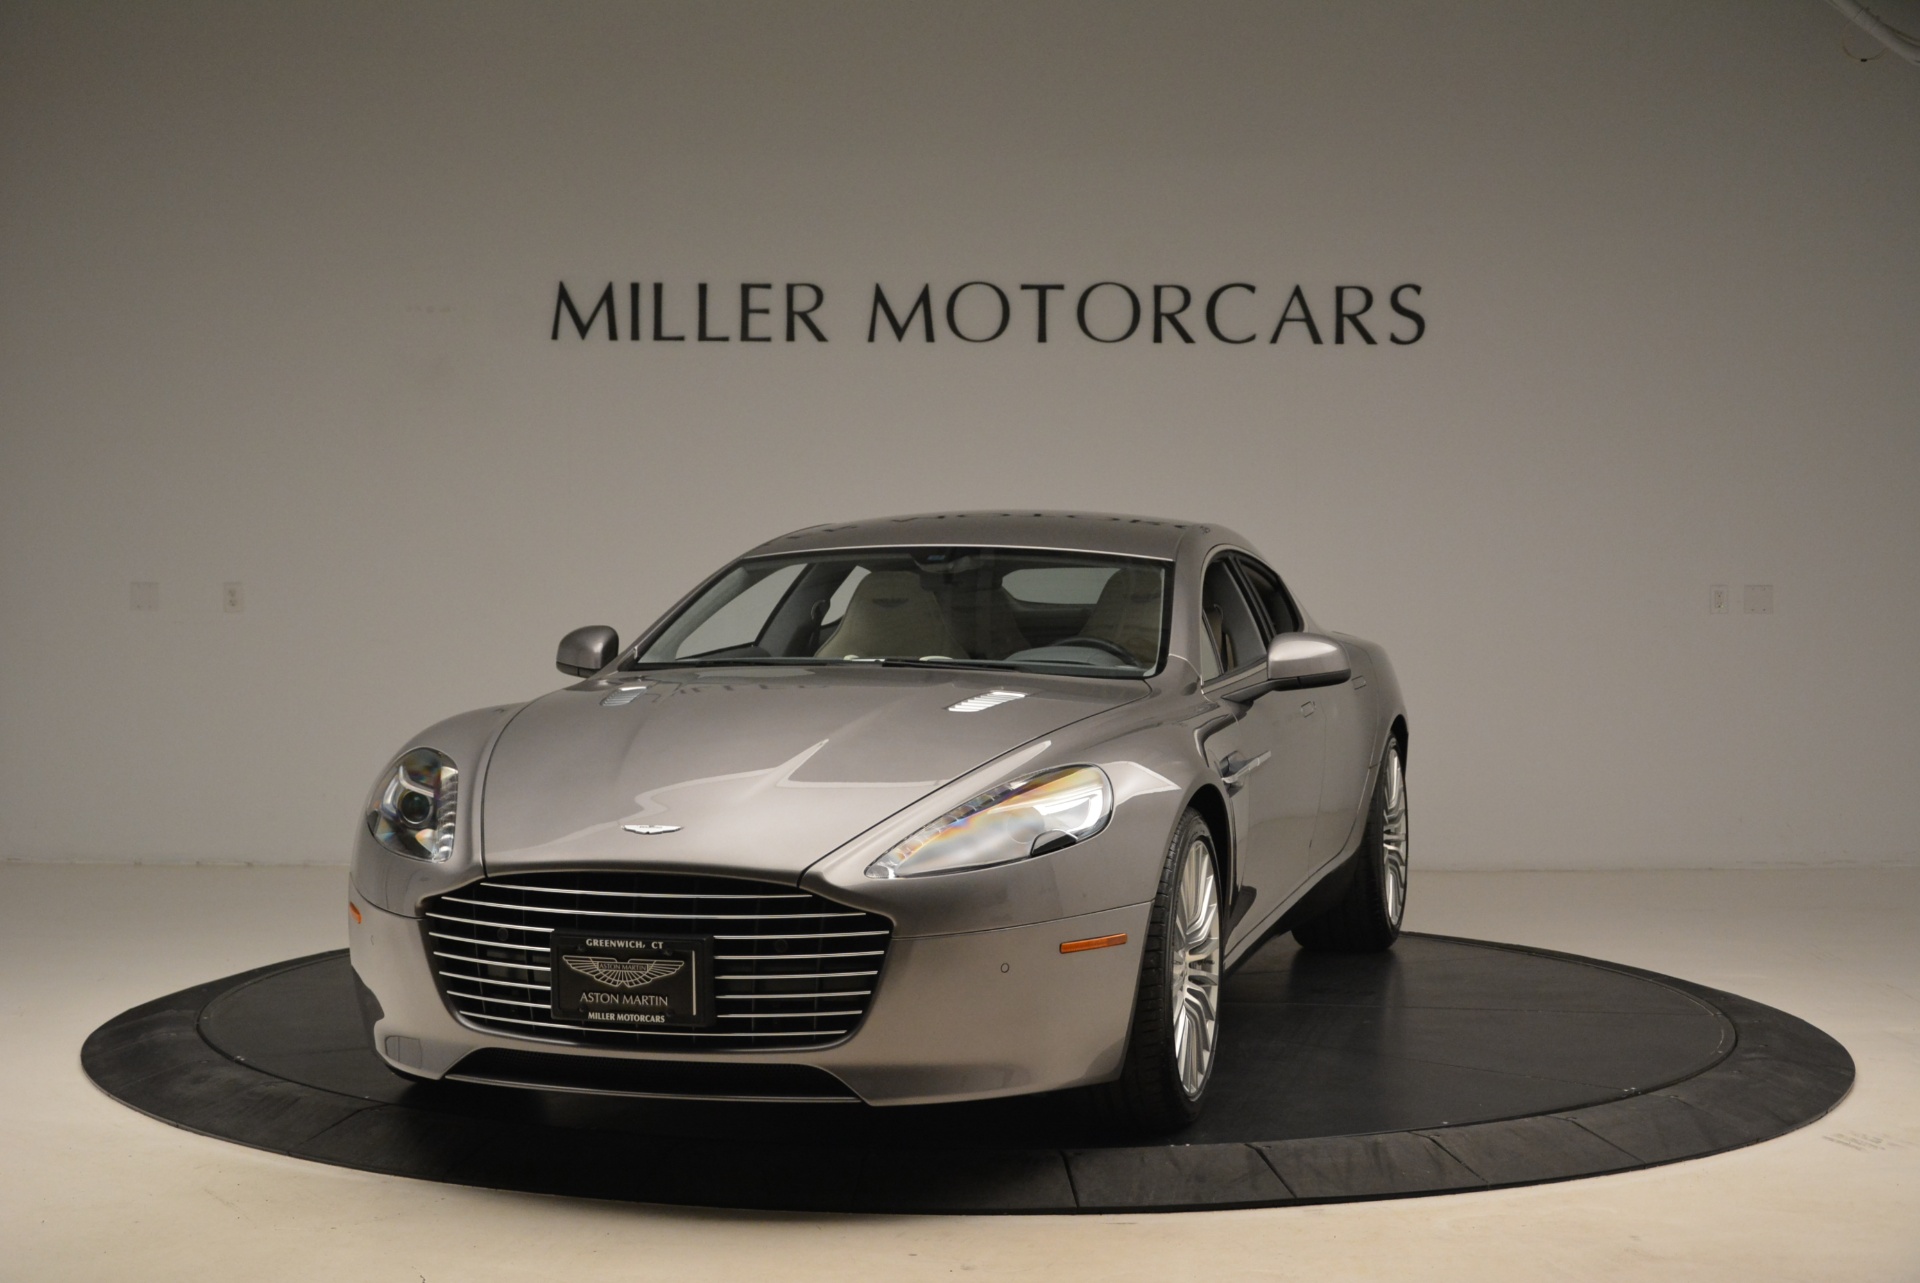 Used 2014 Aston Martin Rapide S for sale Sold at Pagani of Greenwich in Greenwich CT 06830 1